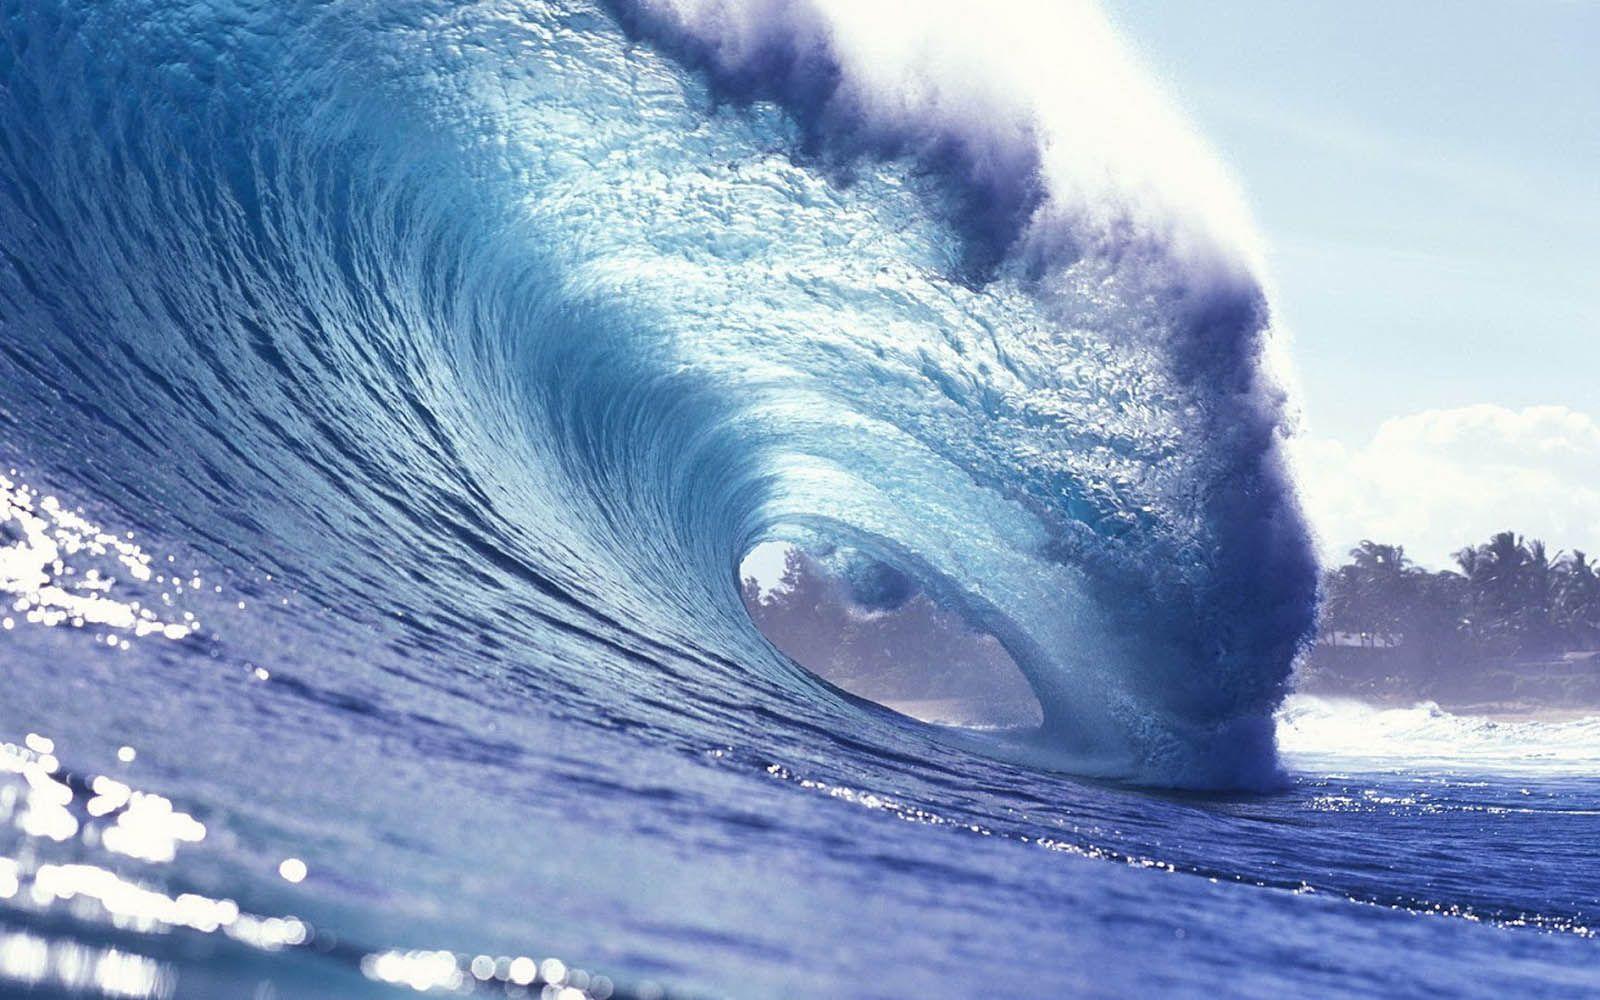 Waves - Image Search Results. Oceanography